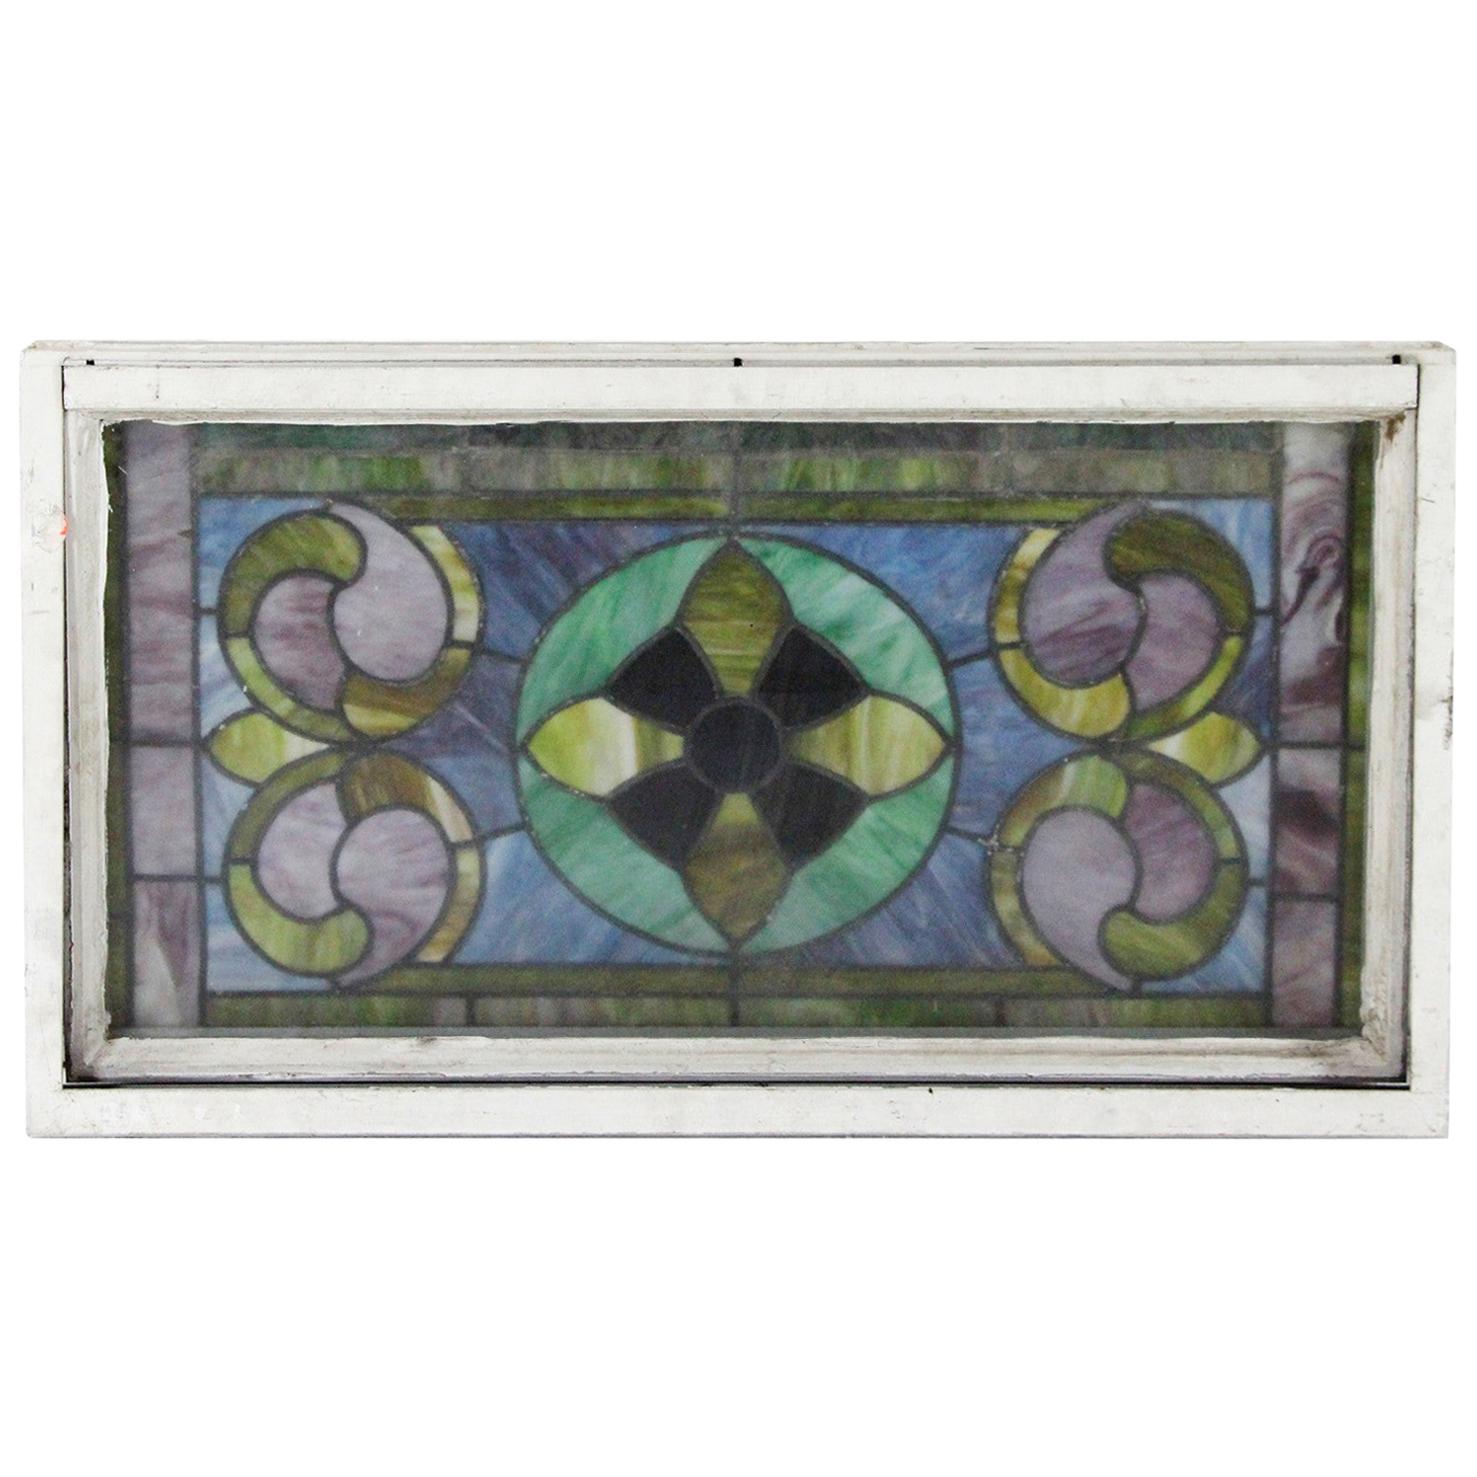 1950s Antique Stained Glass Window with Aluminum Frame Done in Blue and Green